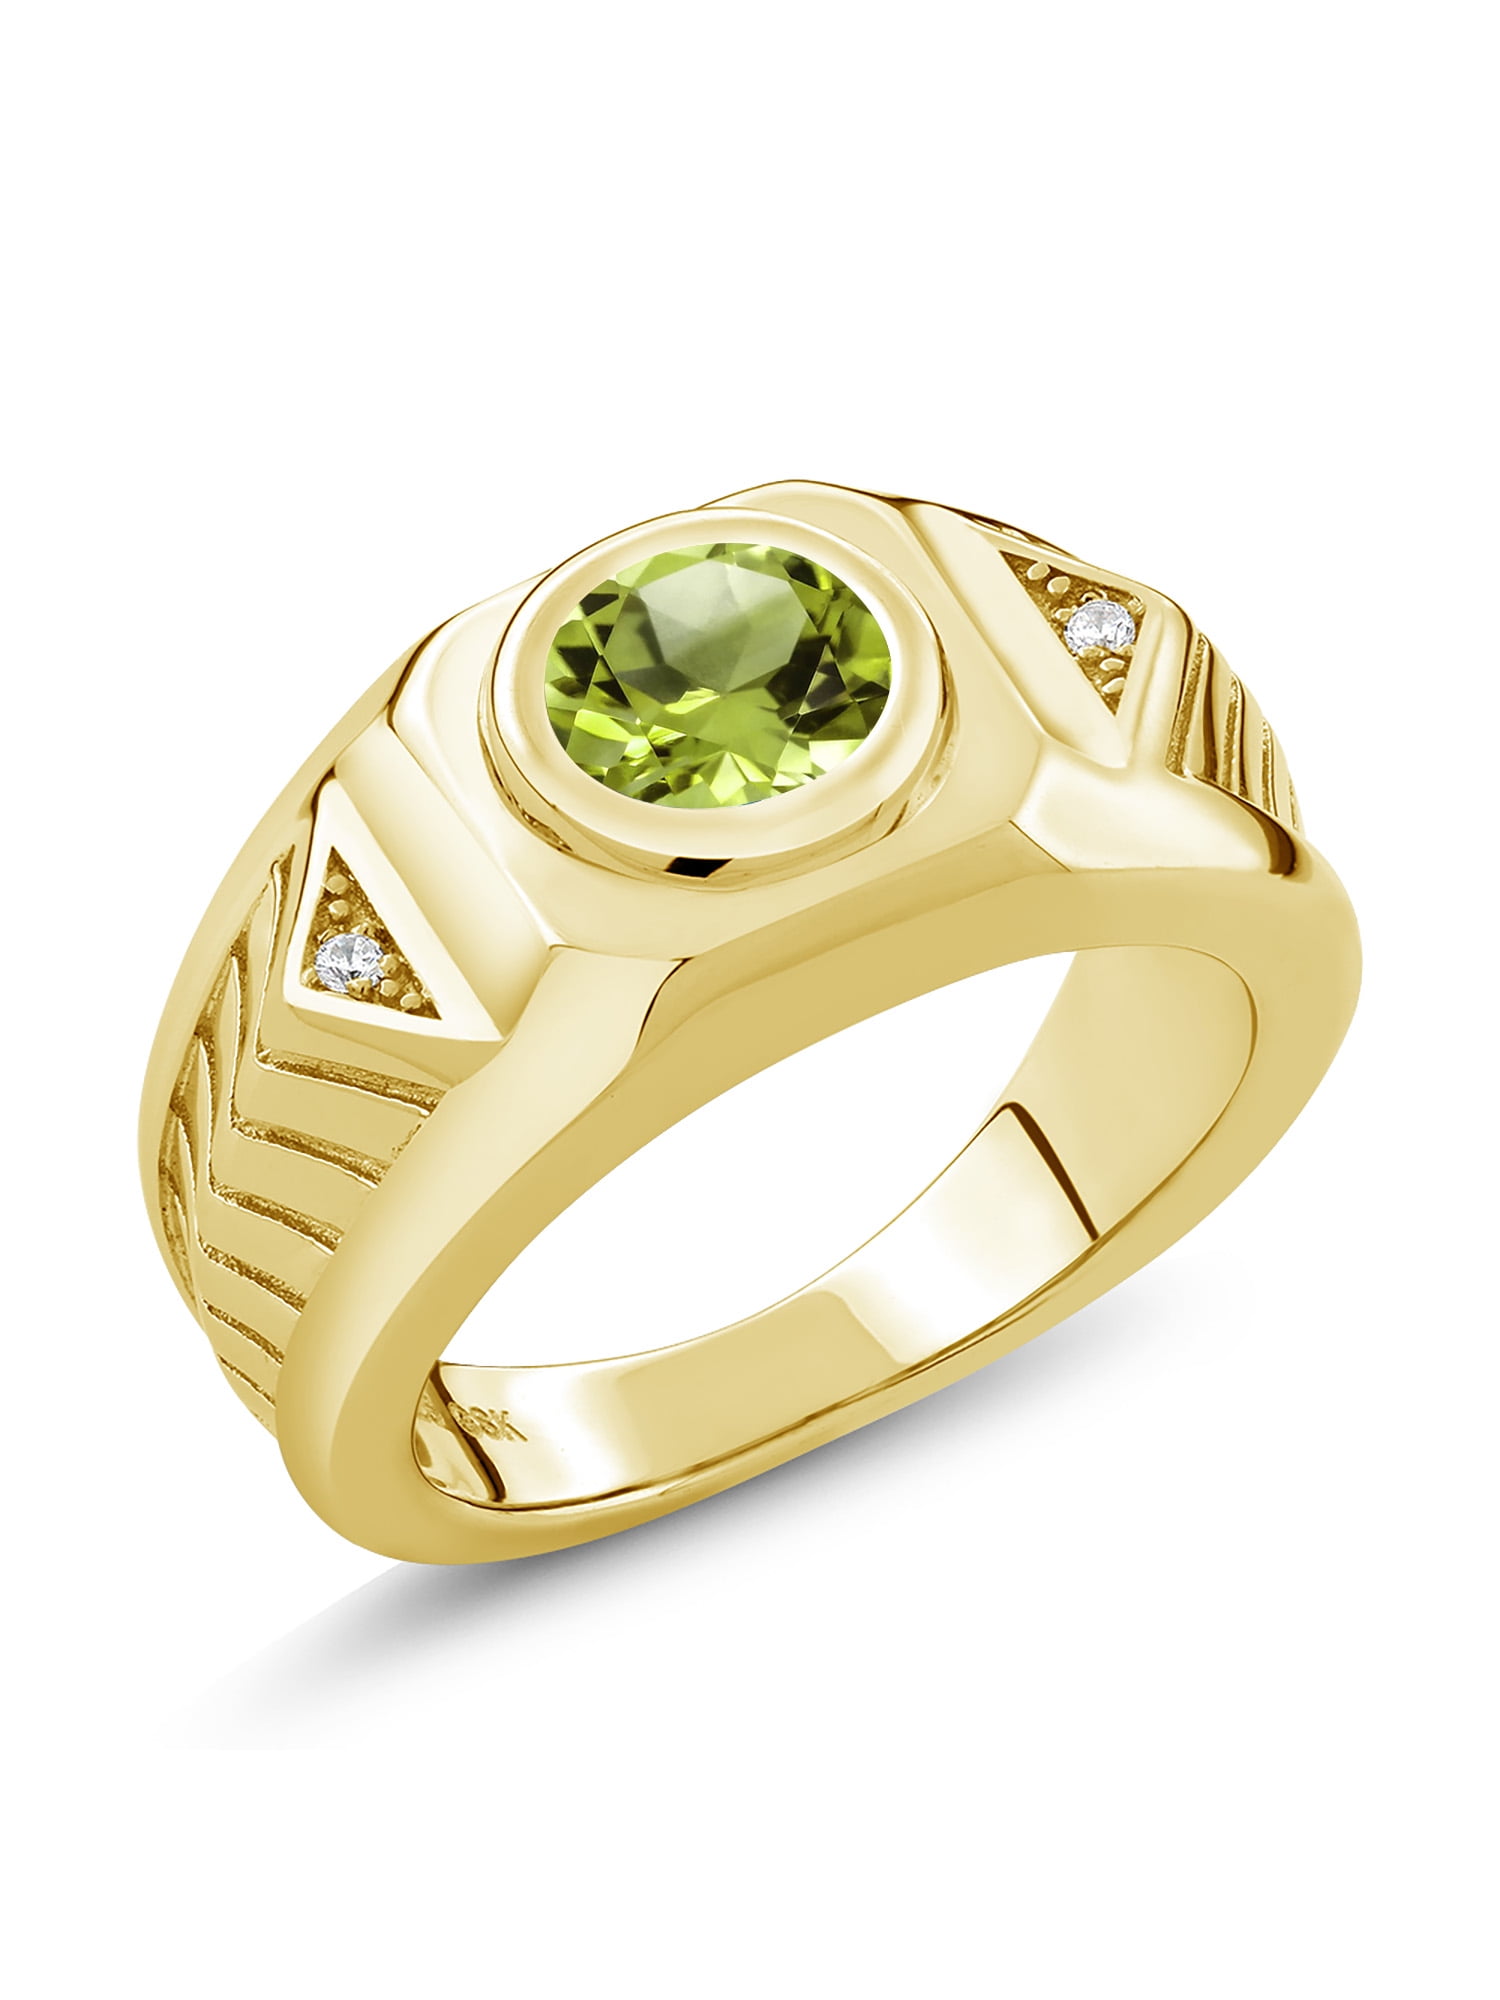 Amazon.com: Men's Peridot Ring, 925 Sterling Silver Ring, Men's ring,  Peridot gemstone Ring, boho ring, handmade ring, Statement Ring, Stone Ring,  signet ring For Christmas : Handmade Products